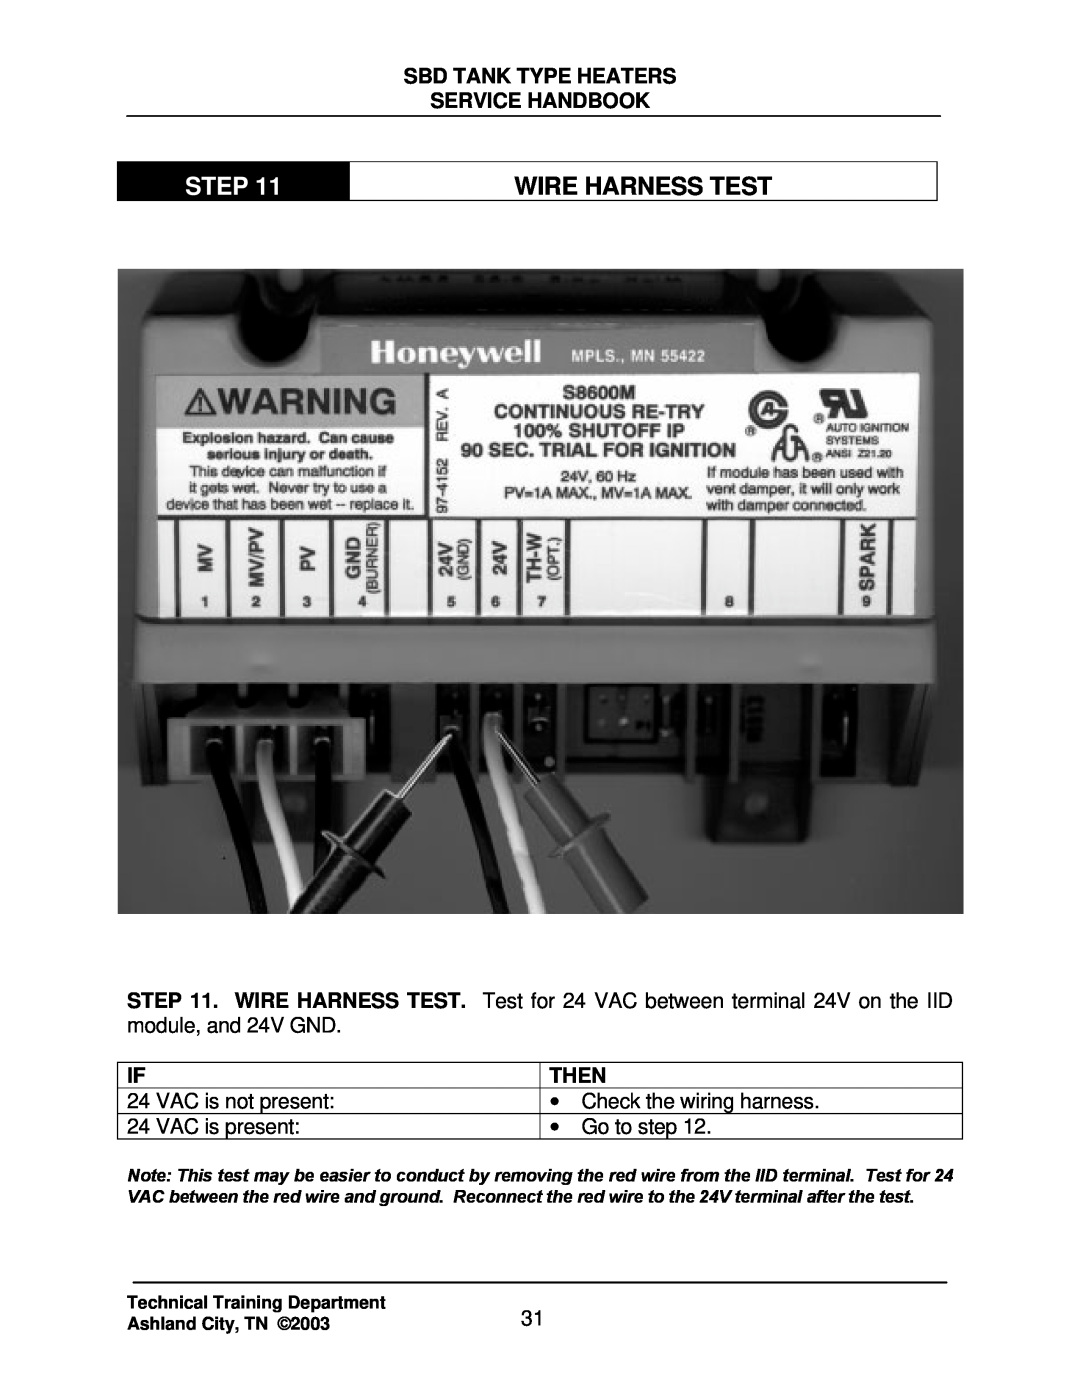 State Industries SBD85 500, SBD71 120 manual Wire Harness Test, Step, Sbd Tank Type Heaters Service Handbook, Then 